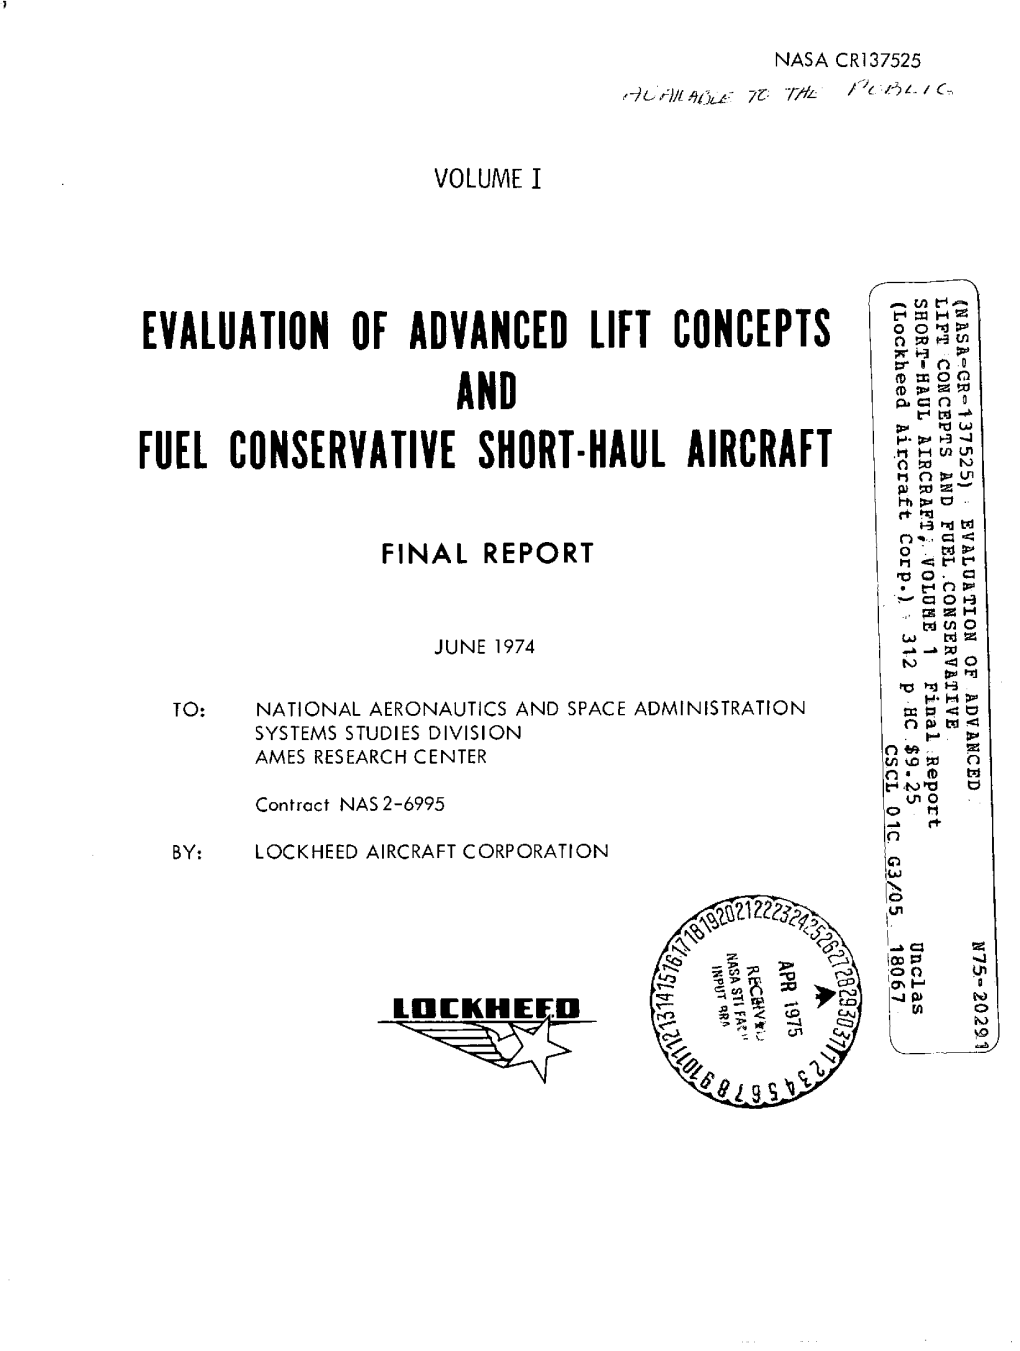 EVALUATION of ADVANCED LIFT CONCEPTS Nm ~' O